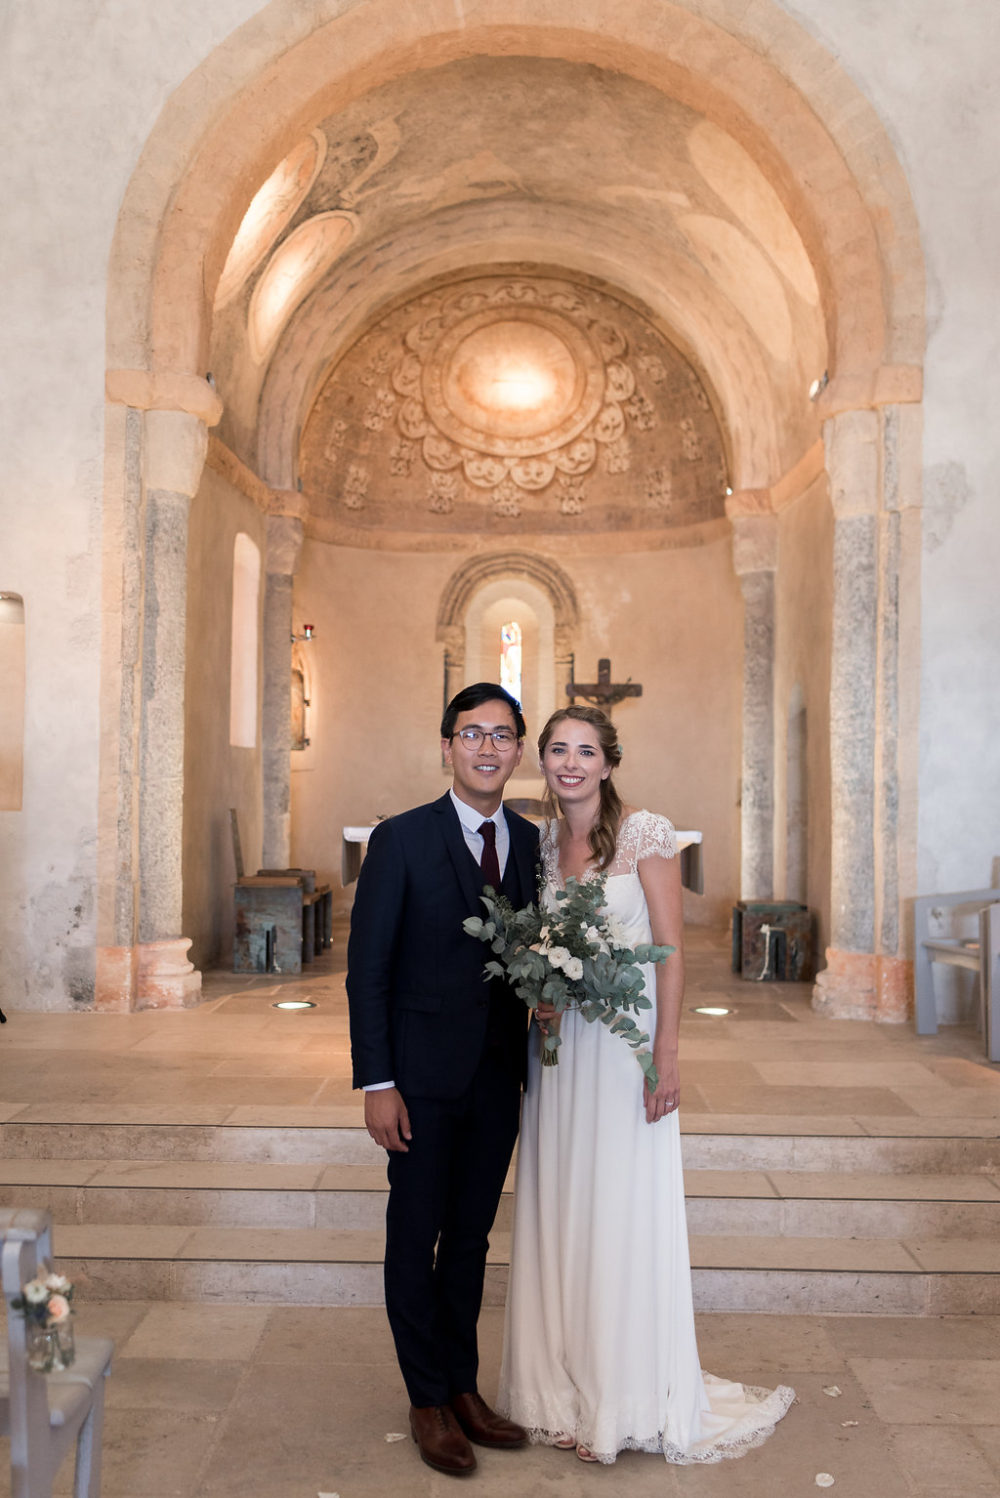 From New York to Le Bassin - Marion + Julien - Blog Mariage Madame C